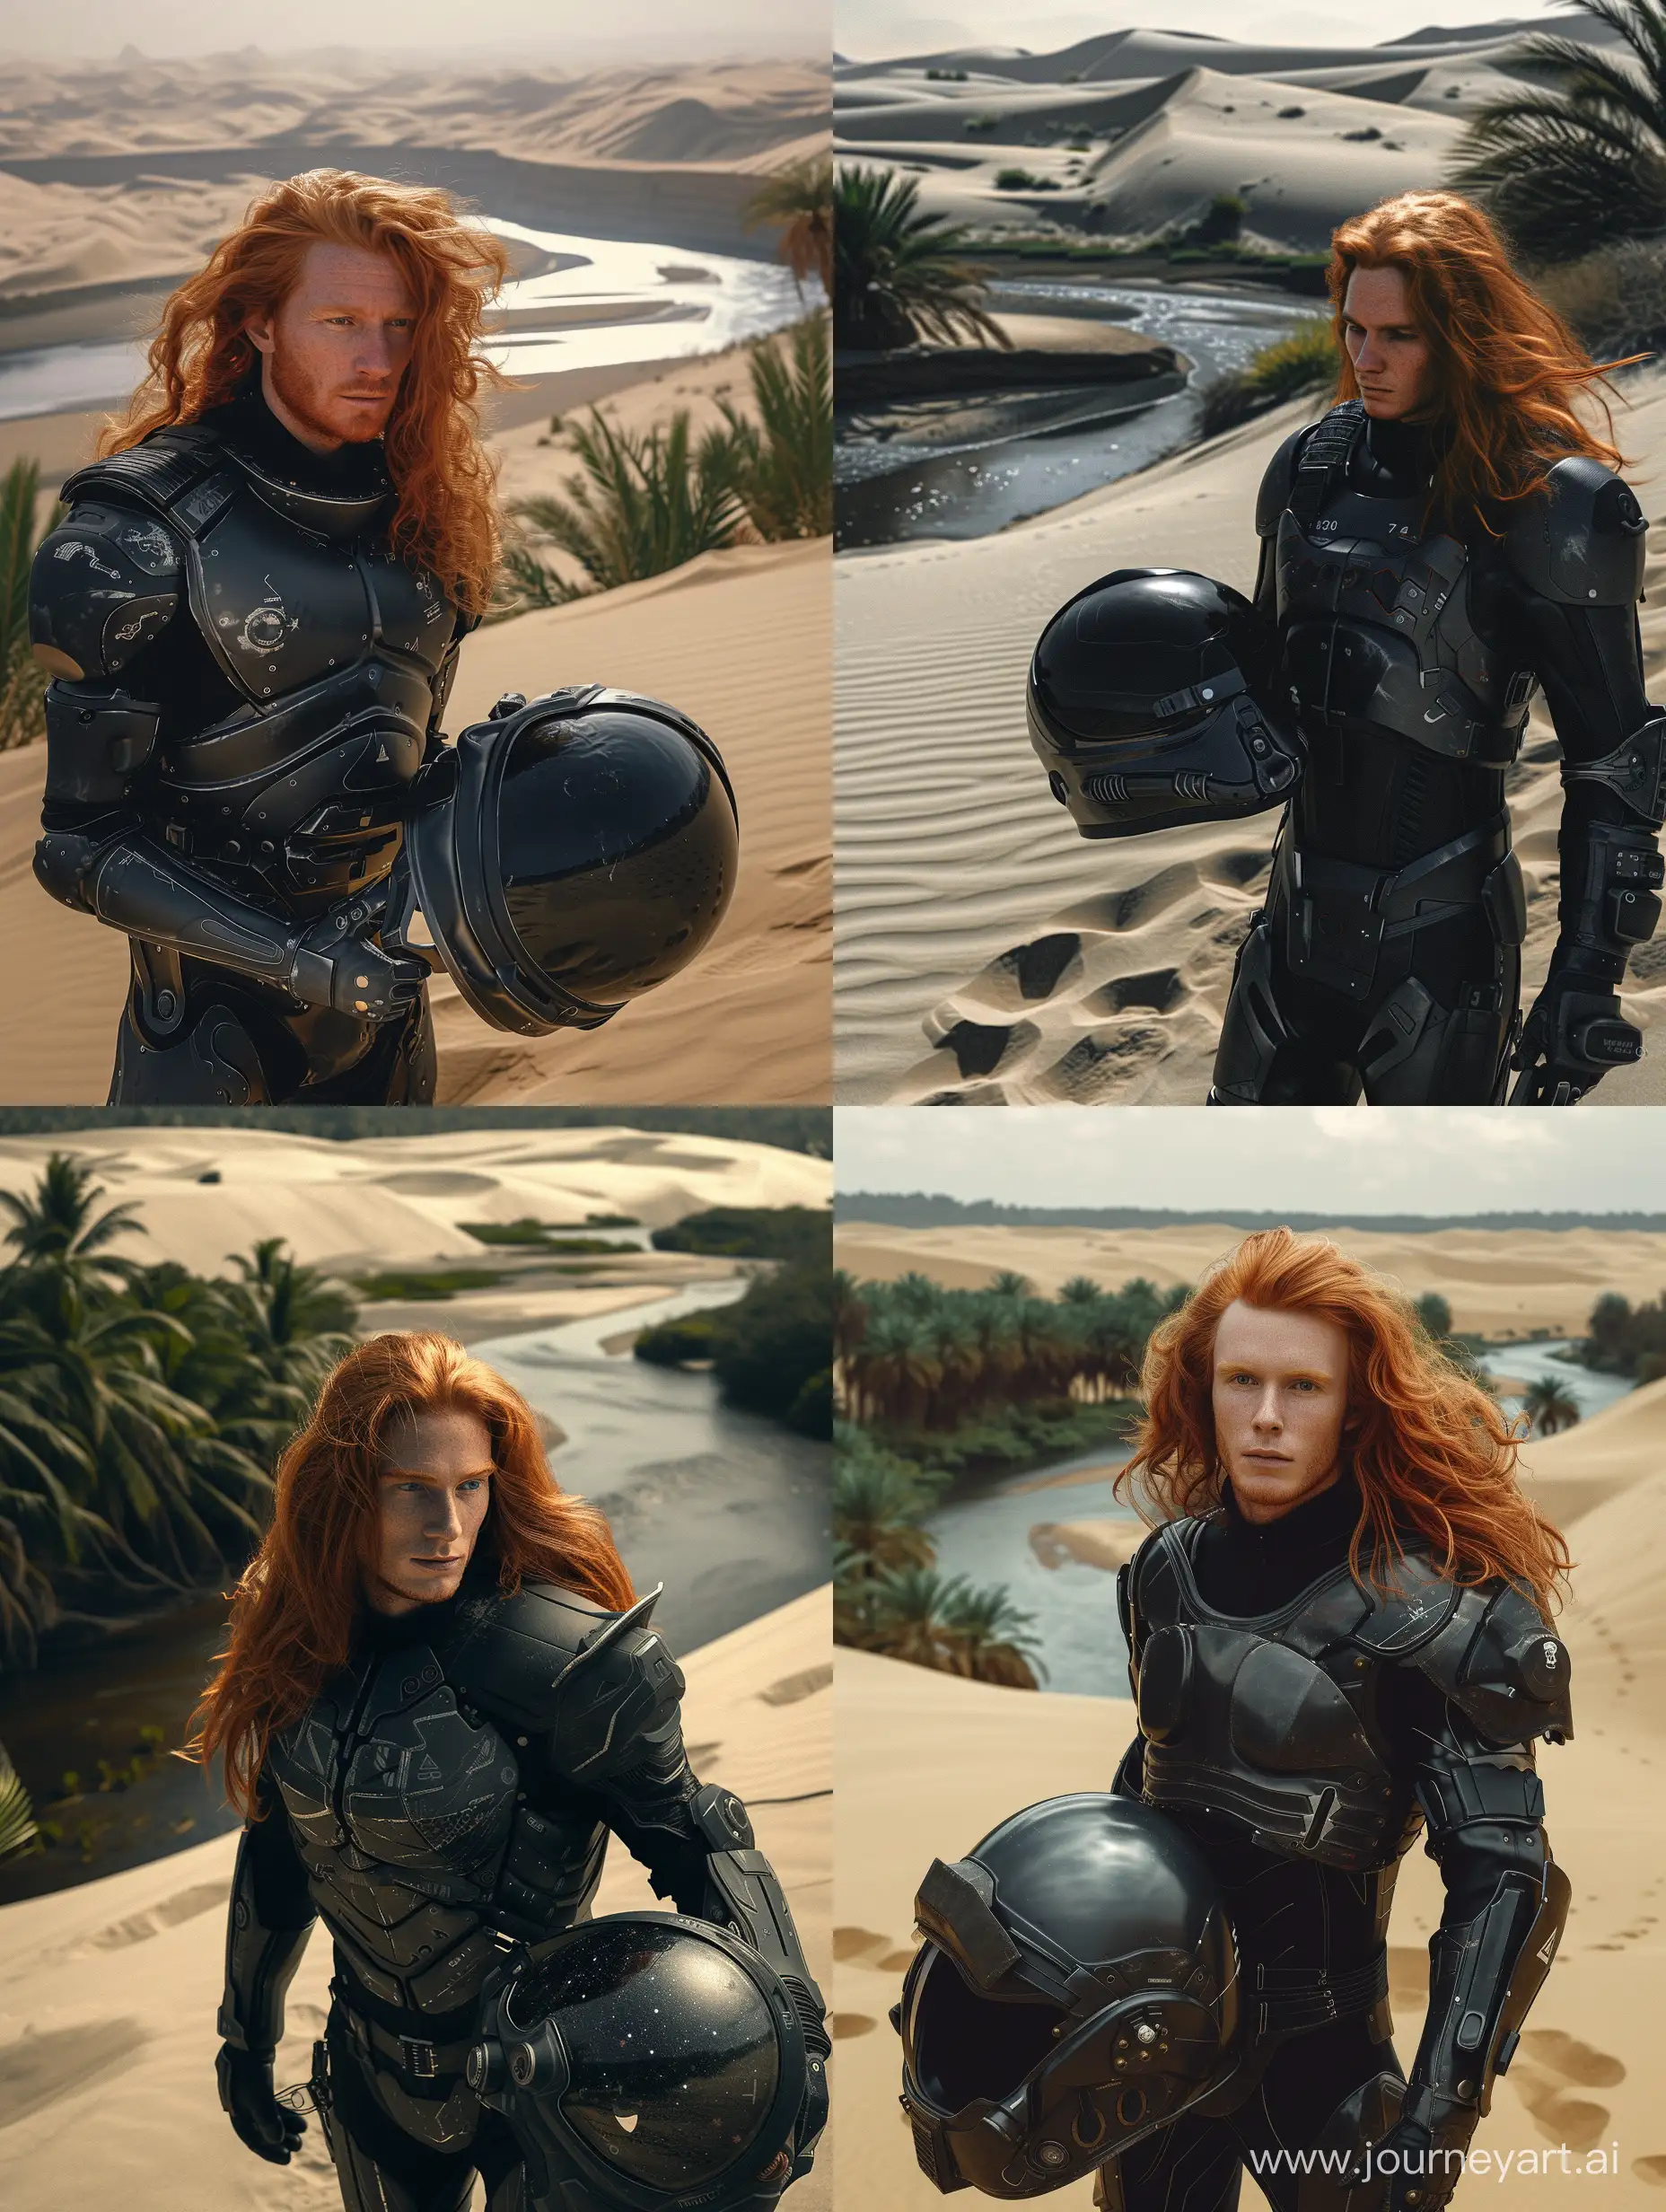 Young-Man-in-RedHaired-Space-Armor-with-Helmet-Against-Desert-Landscape